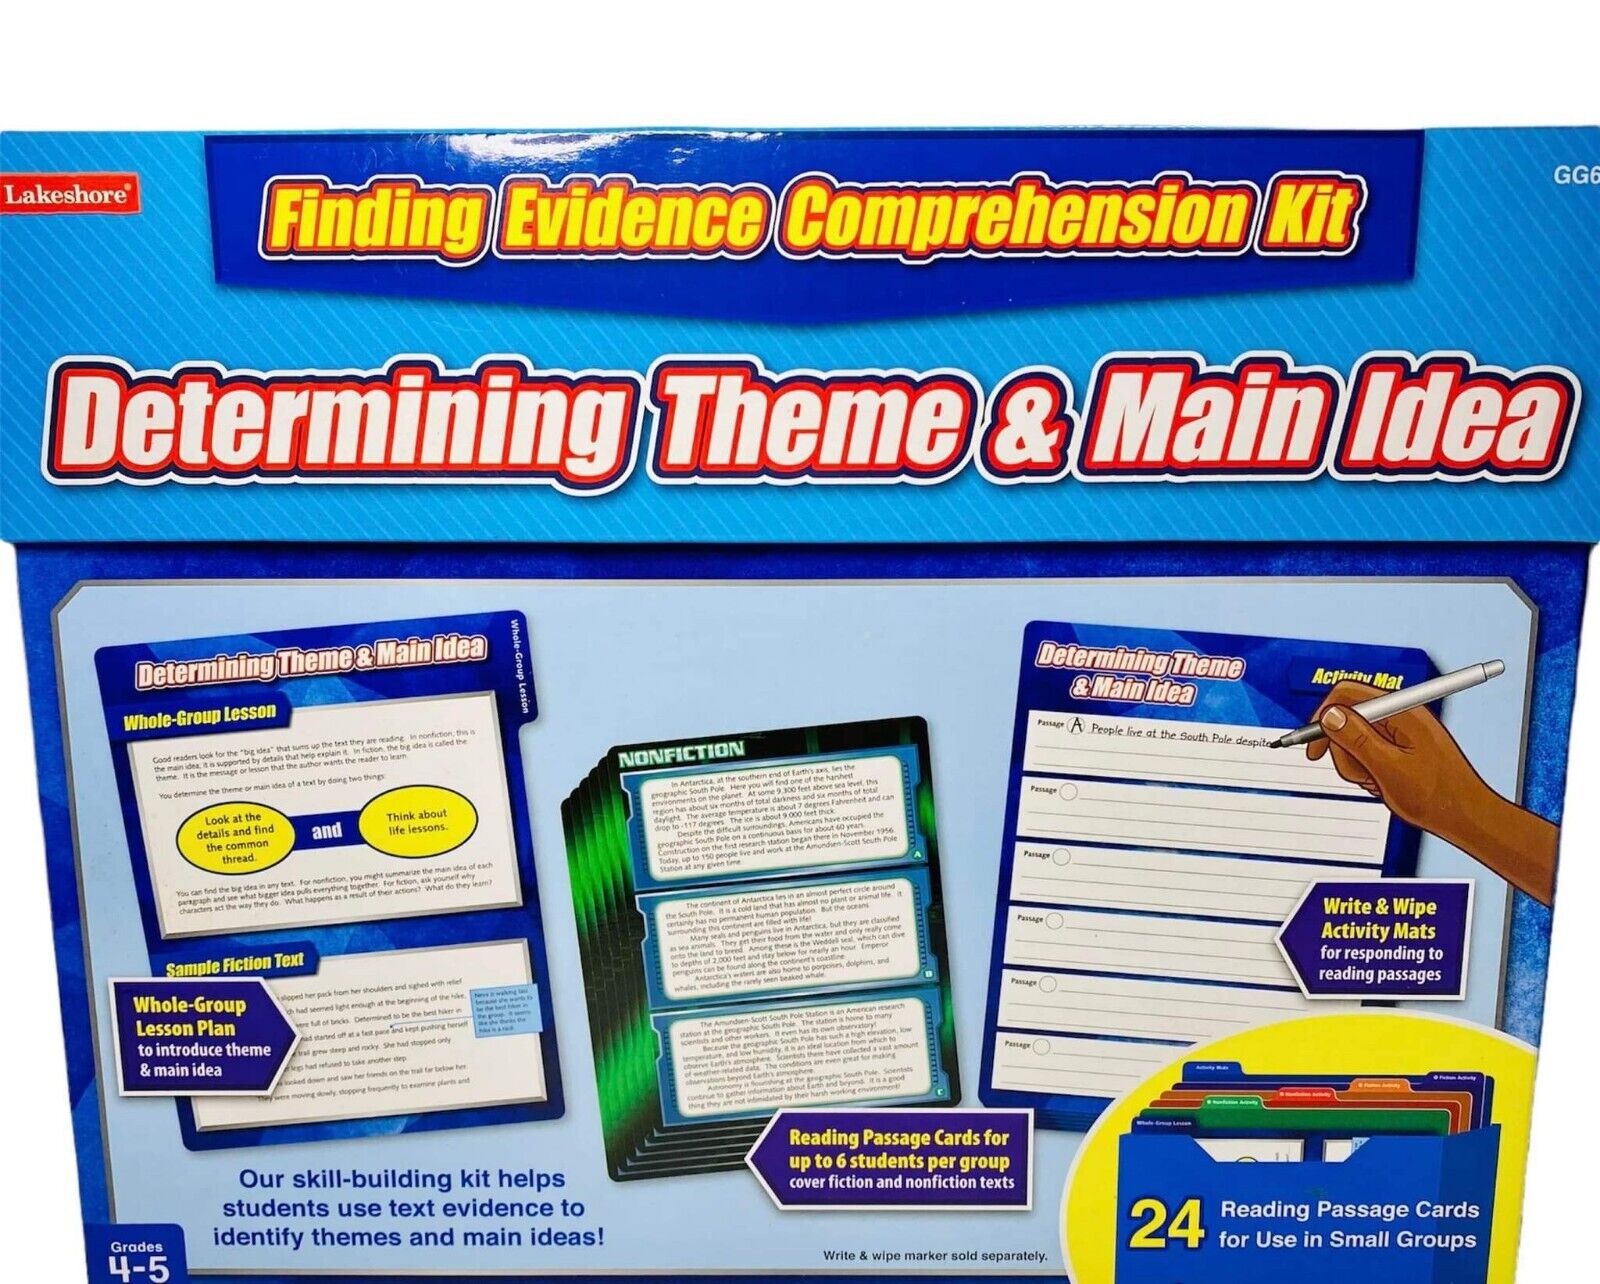 Lakeshore Finding Evidence Comprehension Kit Determining Theme And Main Idea